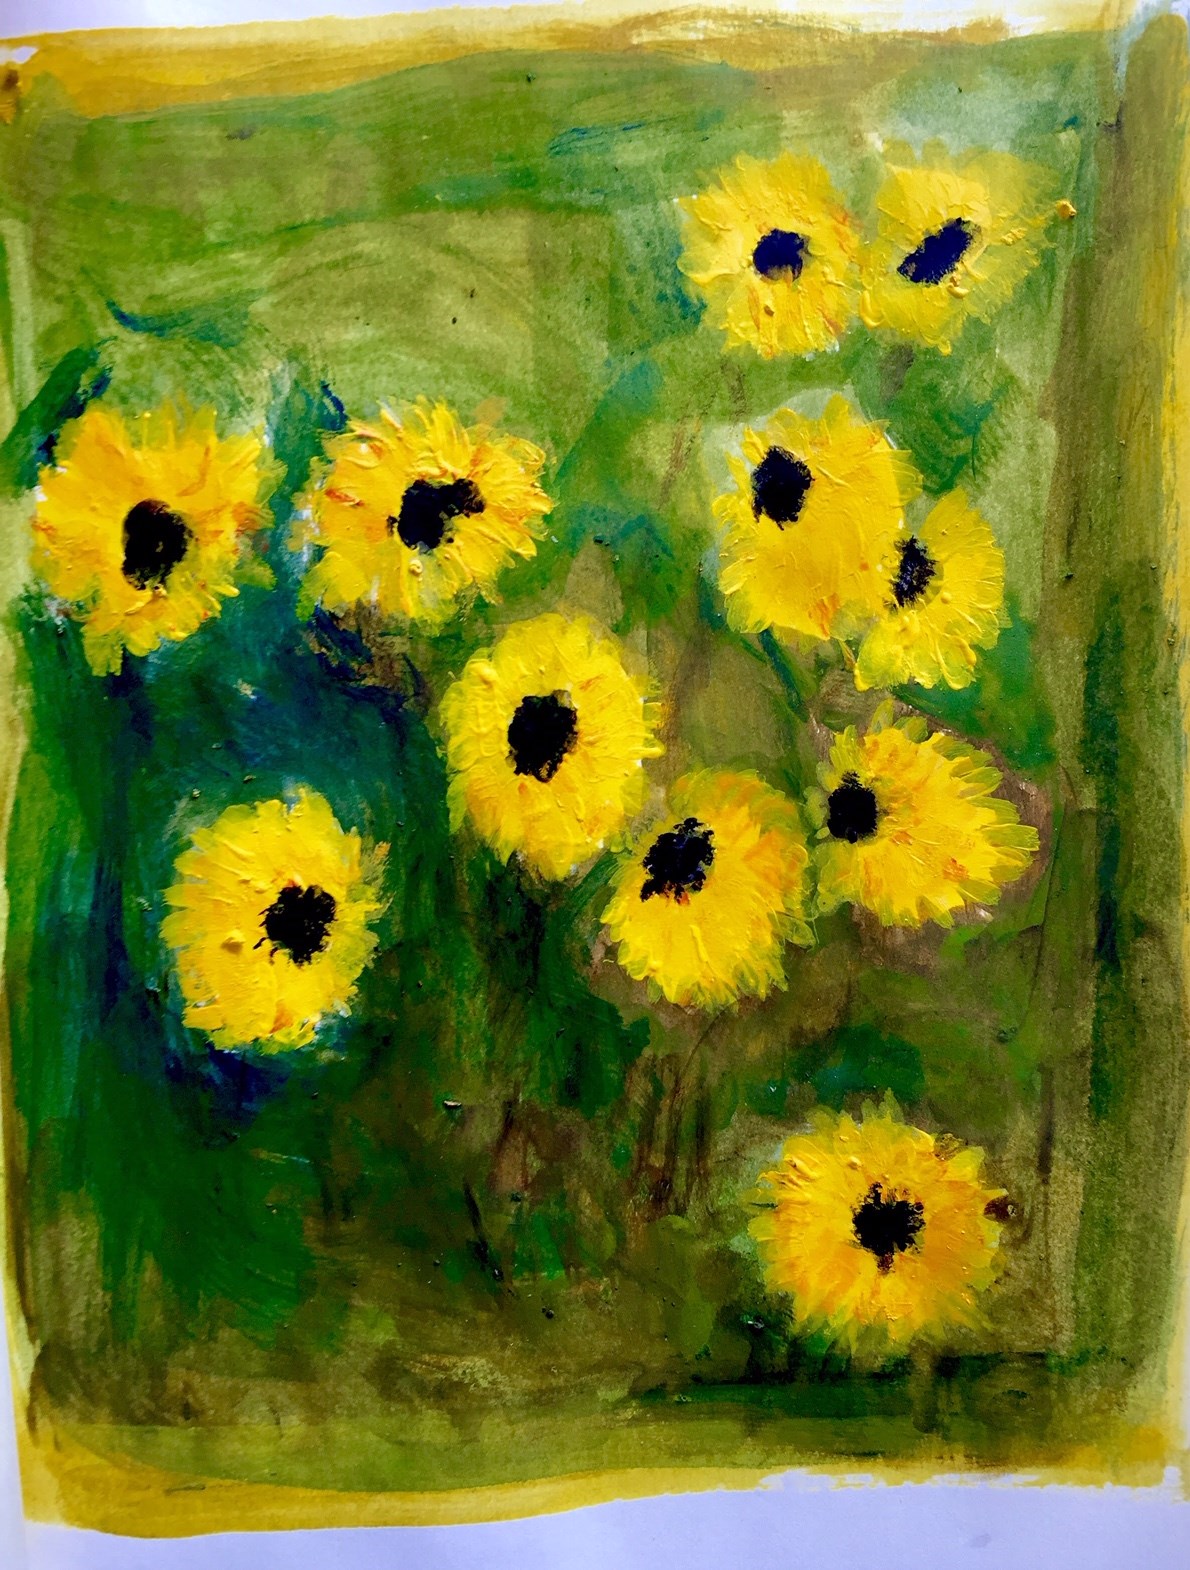 A cluster of many-petaled bright yellow flowers with a dark center pop against a swirling background of different greens in this impressionistic painting.